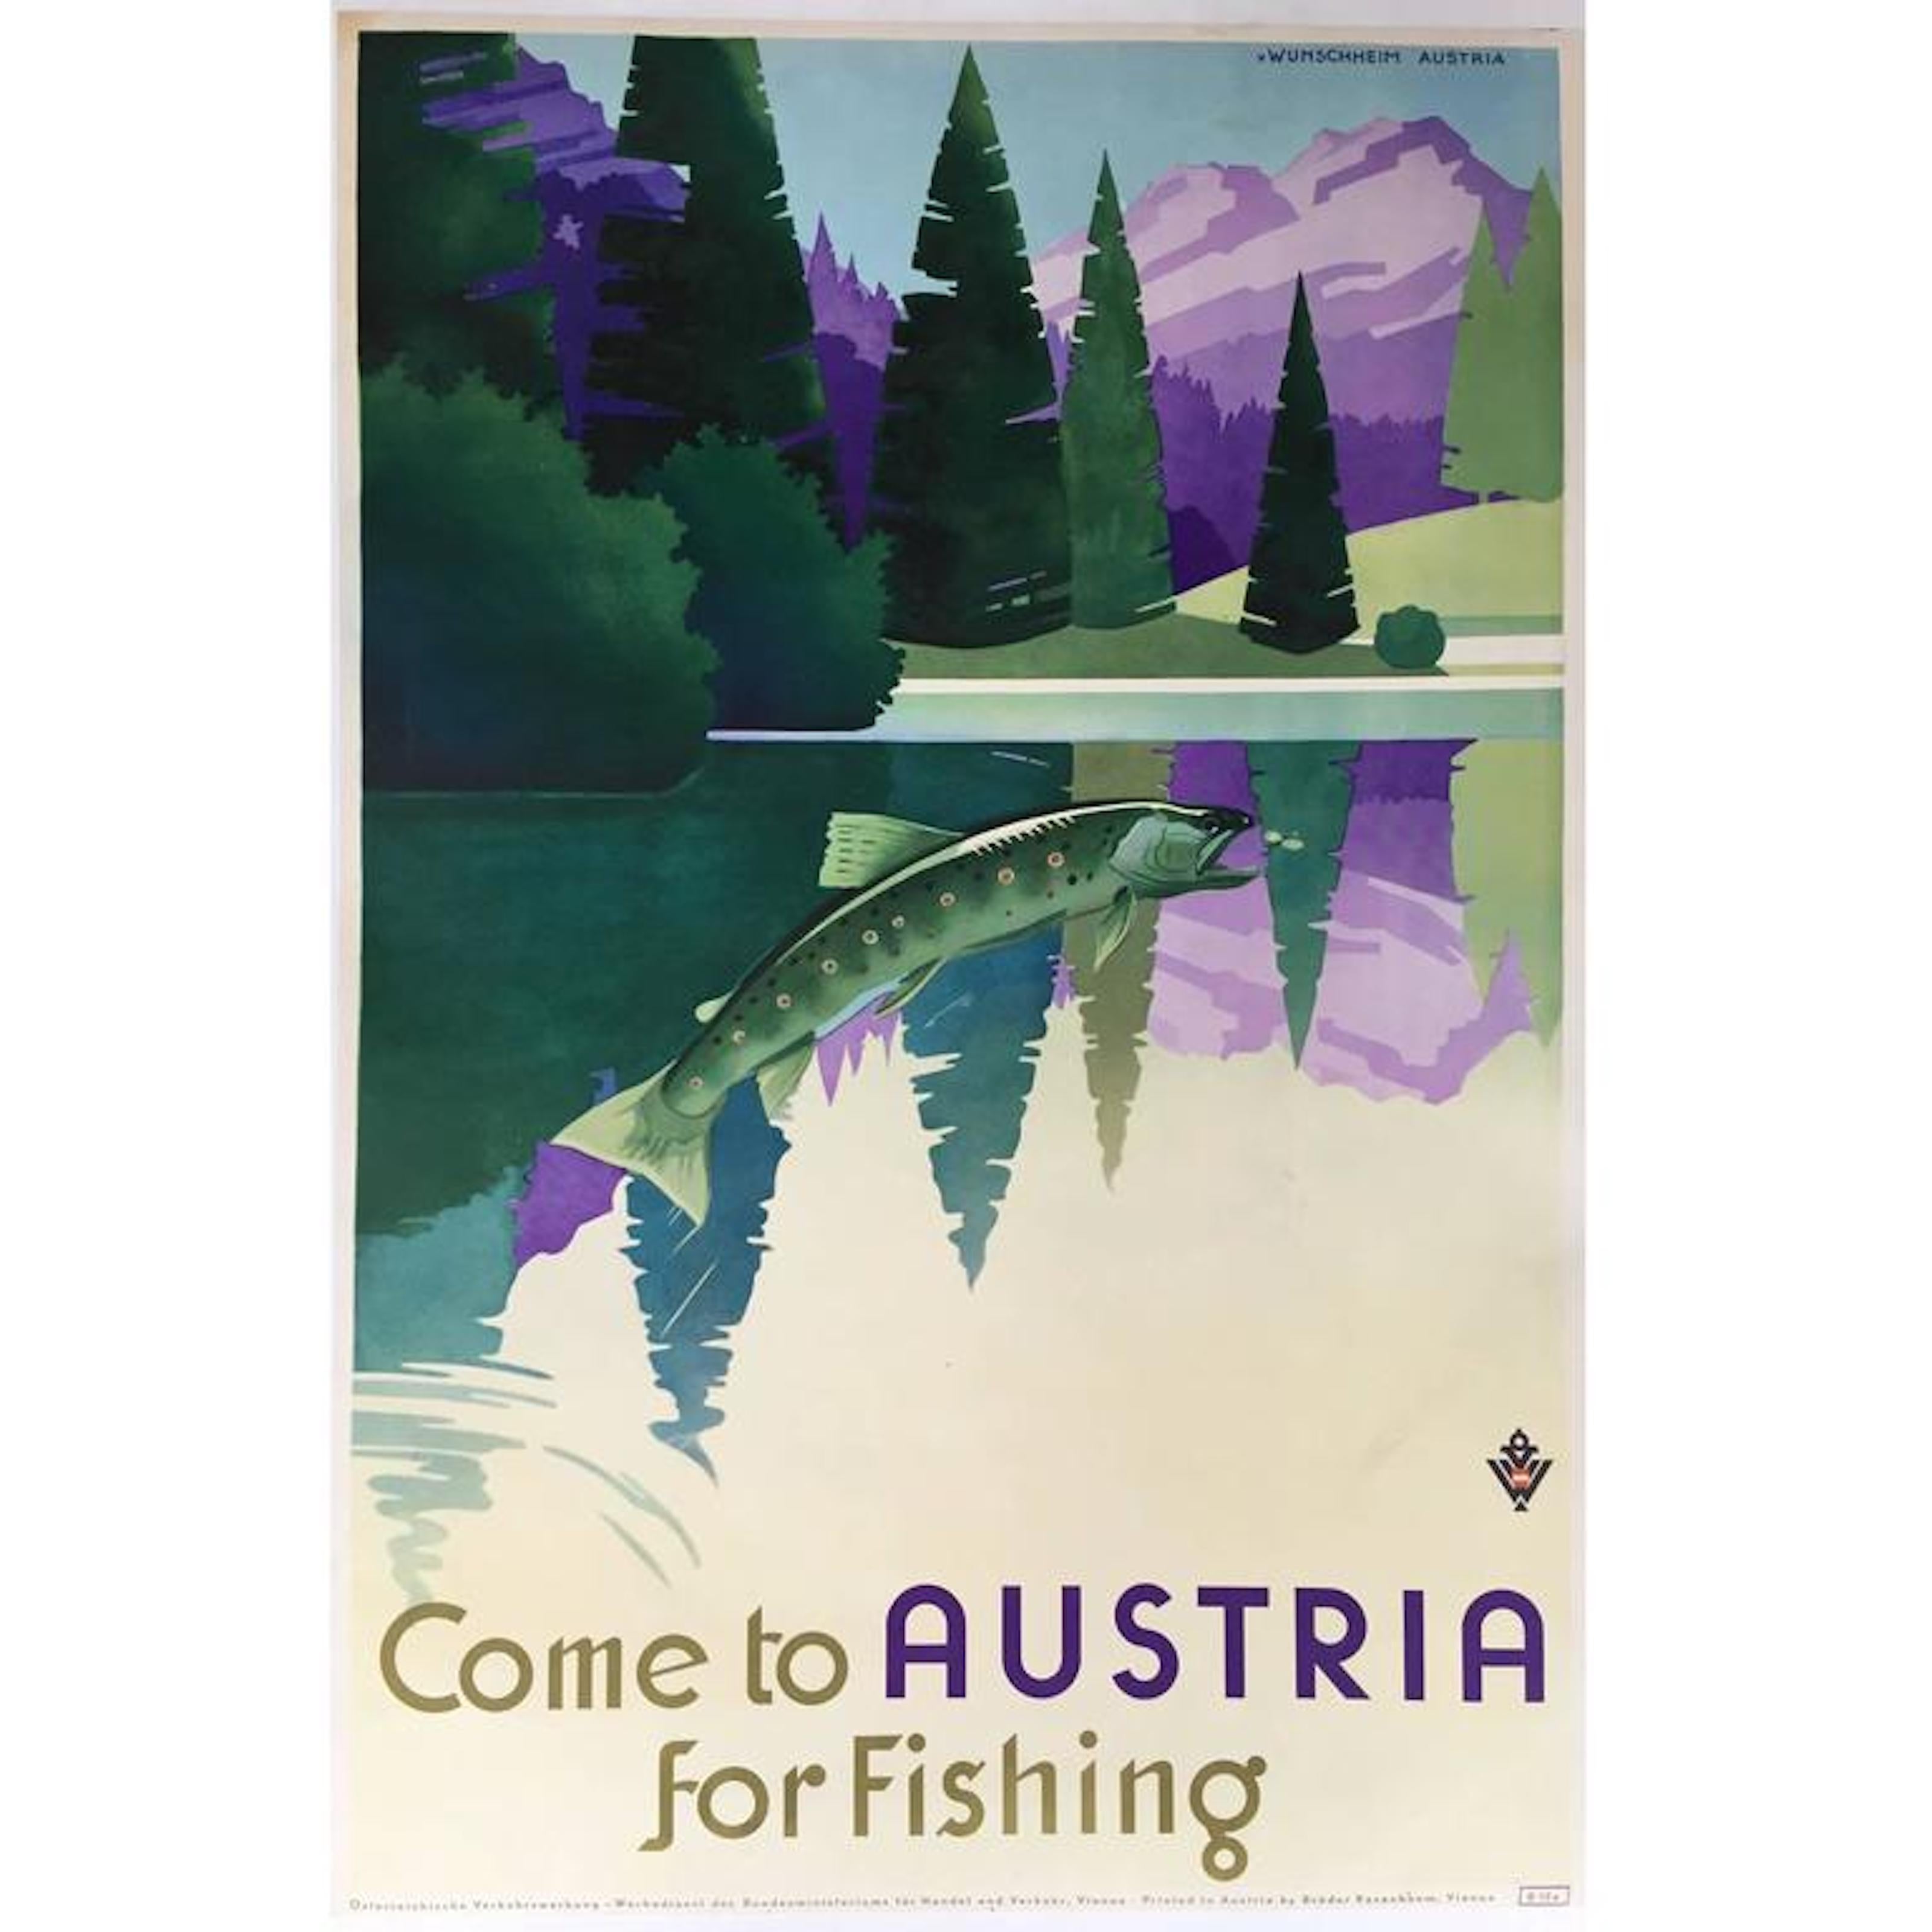 Art Deco Great Vintage Poster Promoting Fishing in Austria